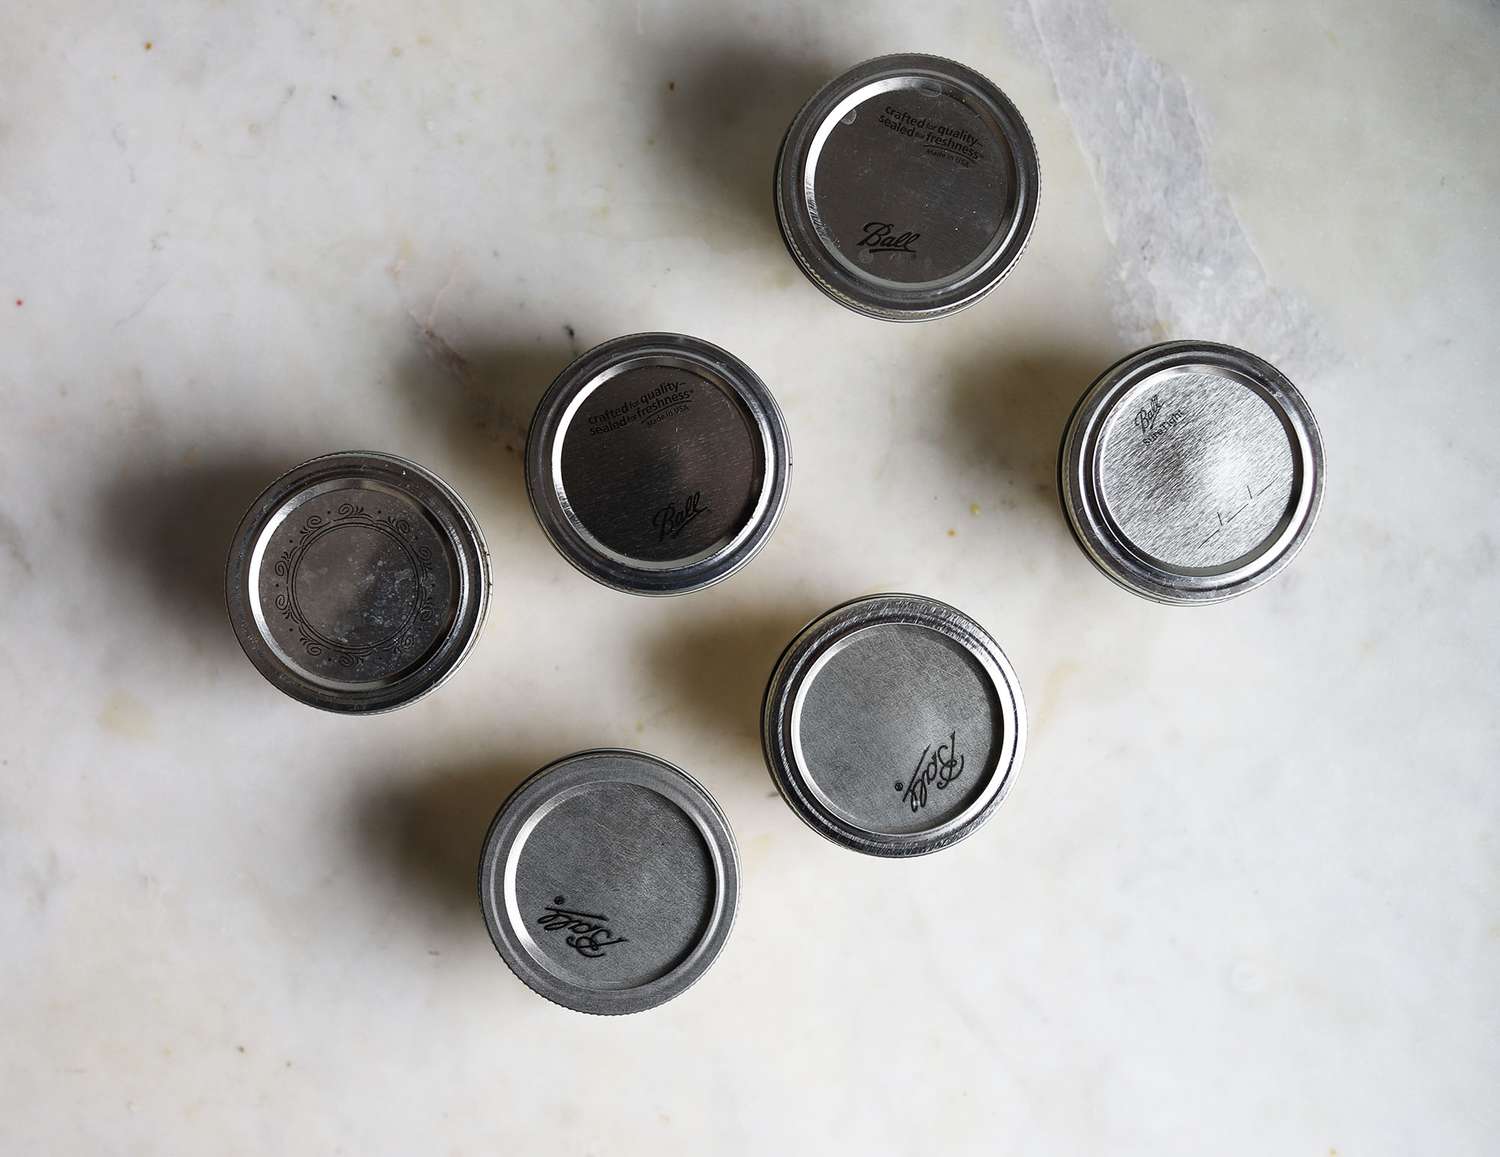 jars with lids closed